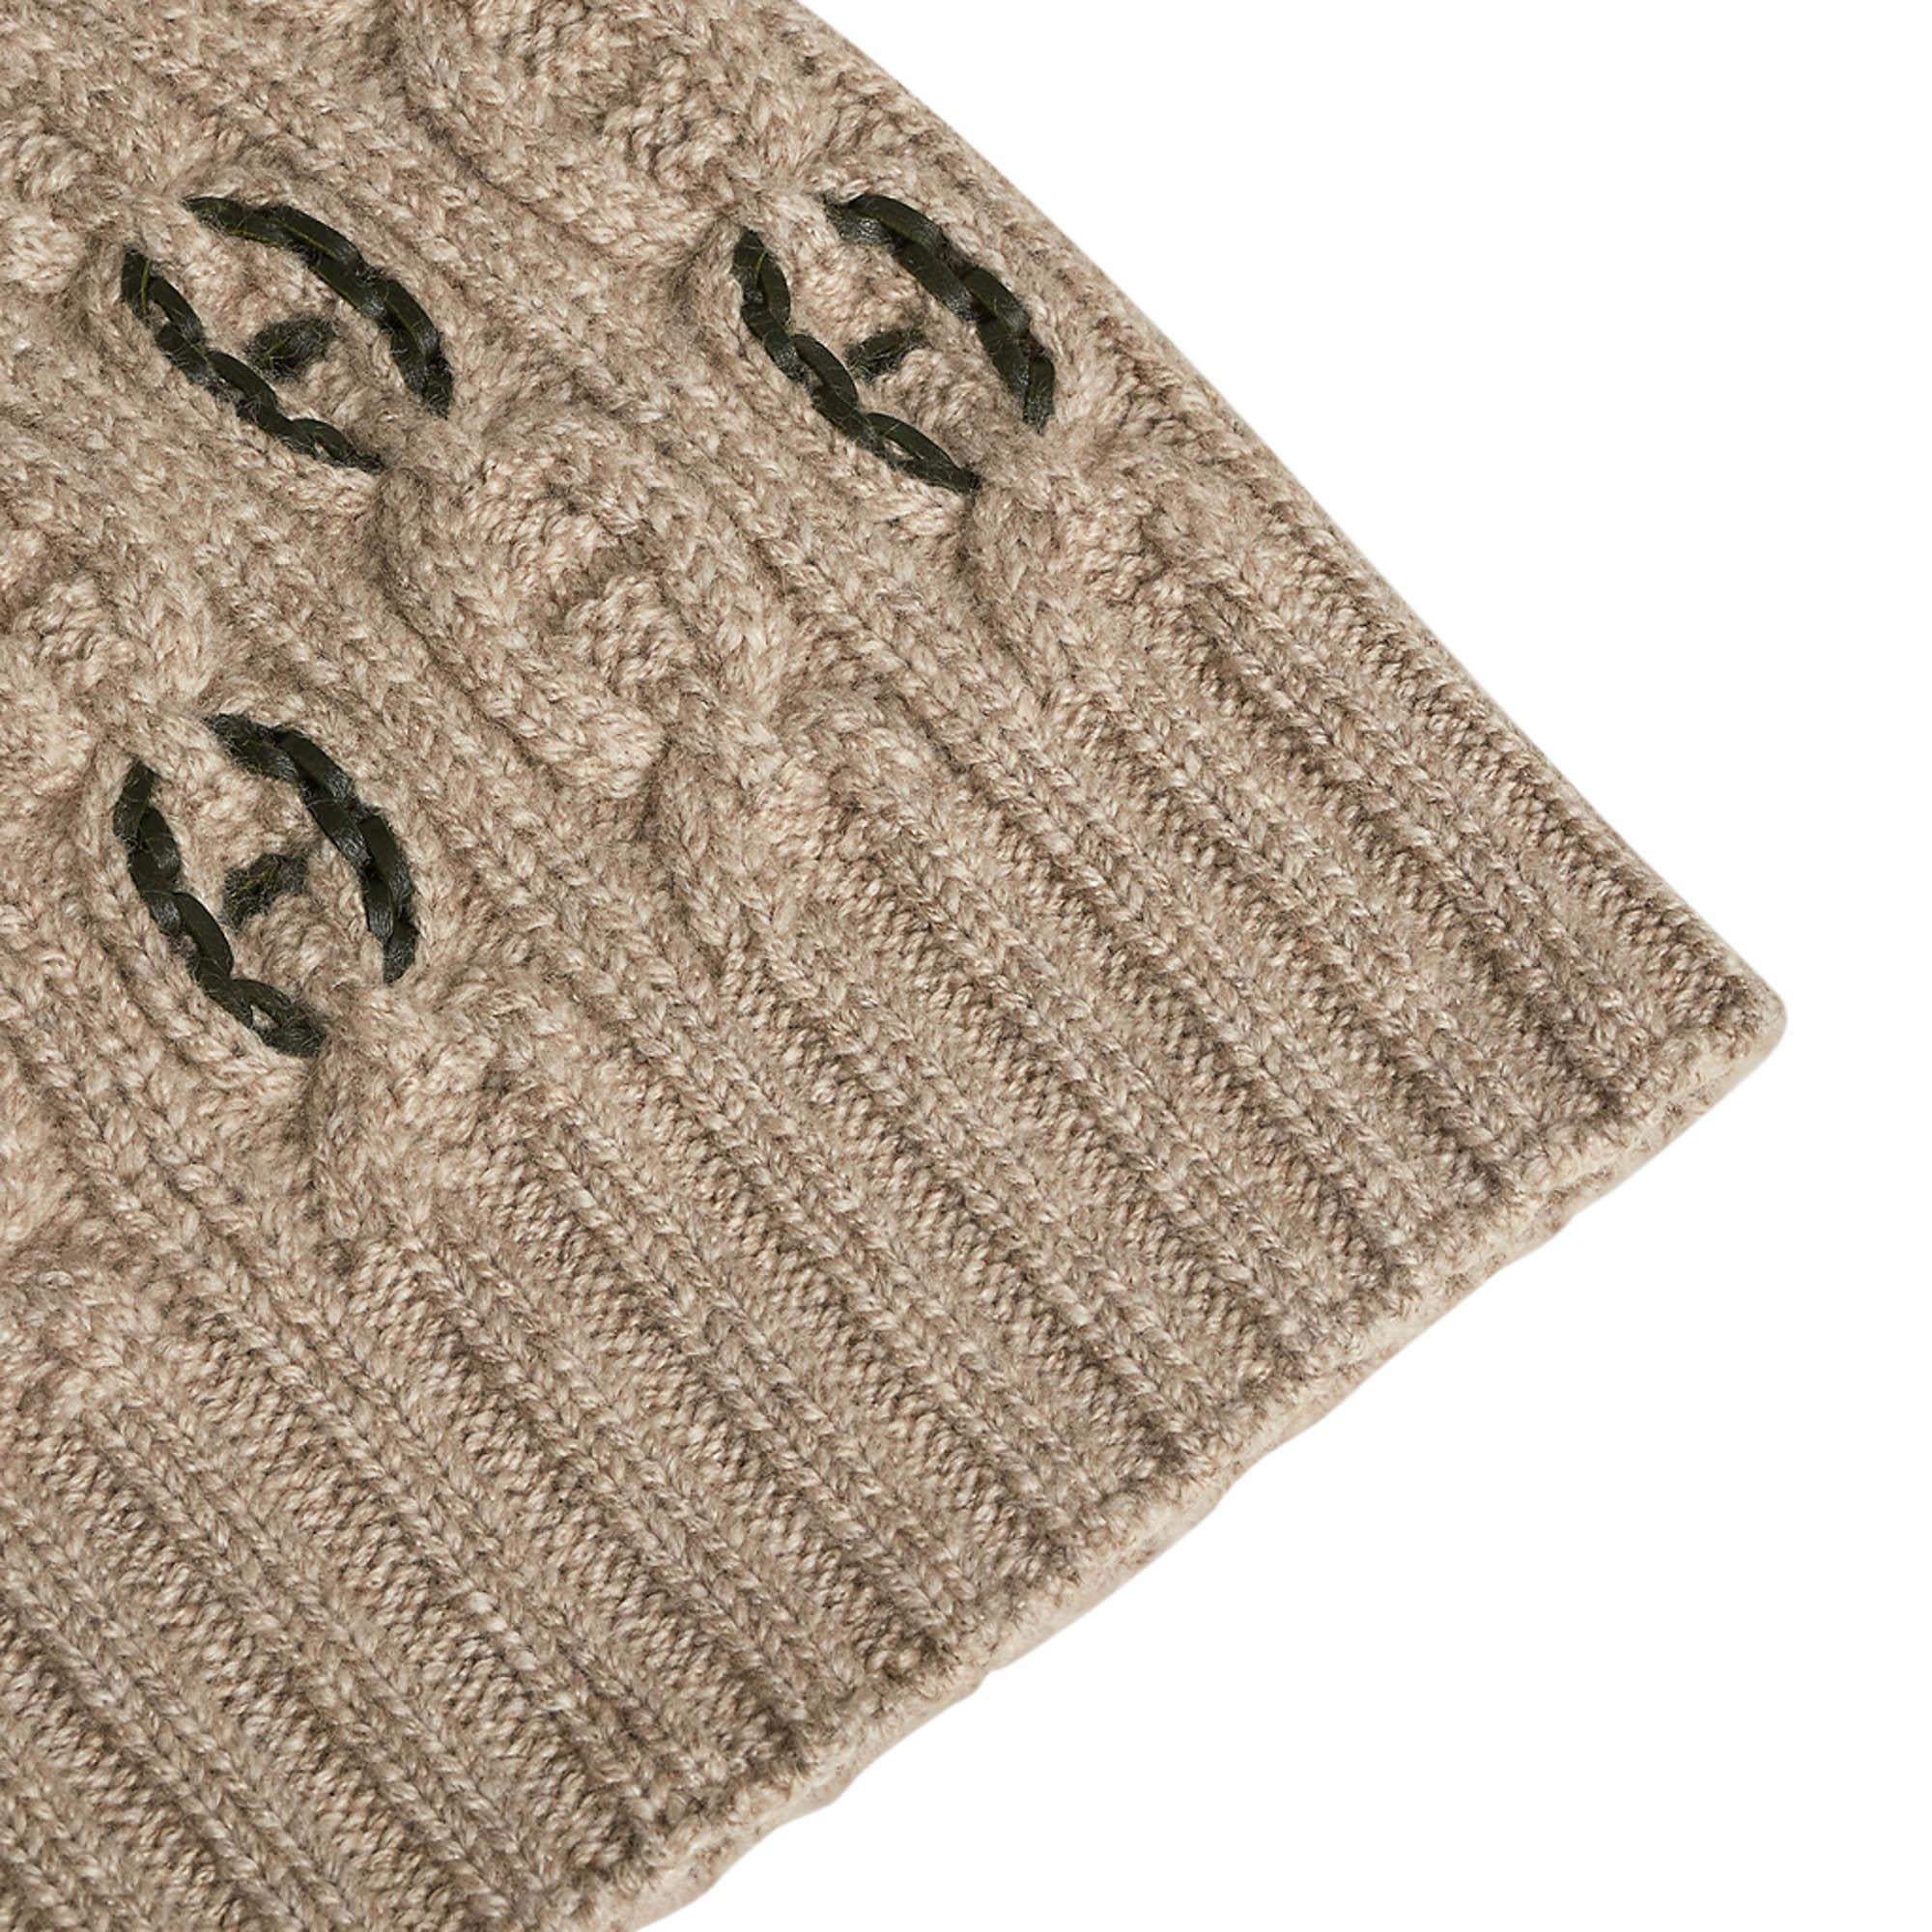 Mightychic offers an Hermes Tri Maillon Beanie featured in Beige cashmere.
Iconic Chaine d'Ancre pattern in relief with a braided detail in lambskin.
100% Cashmere and lambskin.
Made in Italy
See photos of matching gloves under separate